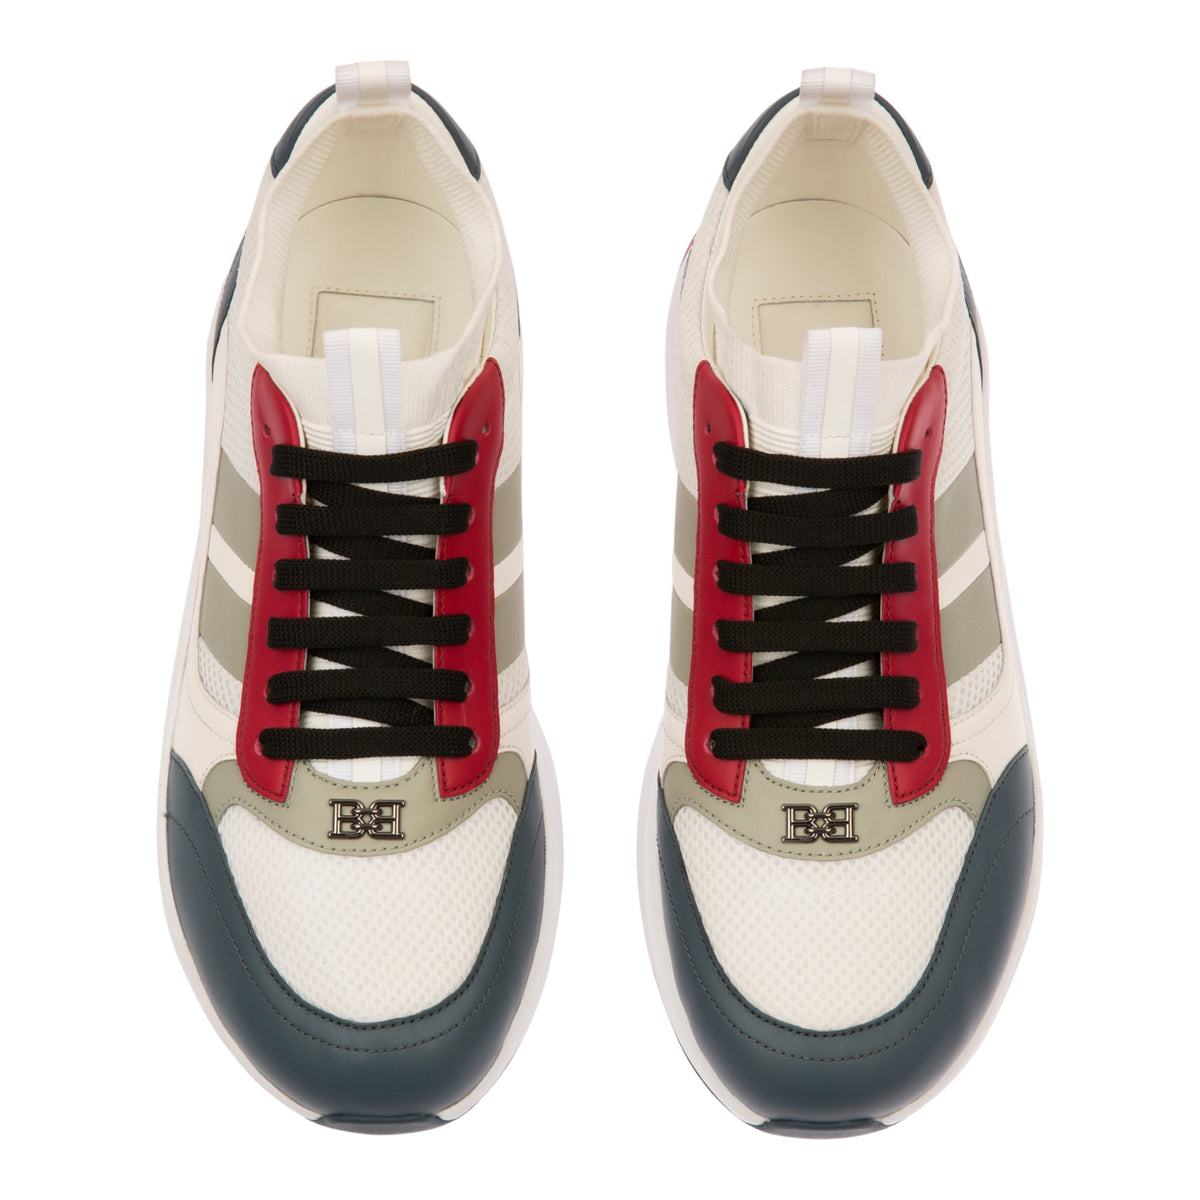 Bally Men's Vayron Leather Sneakers